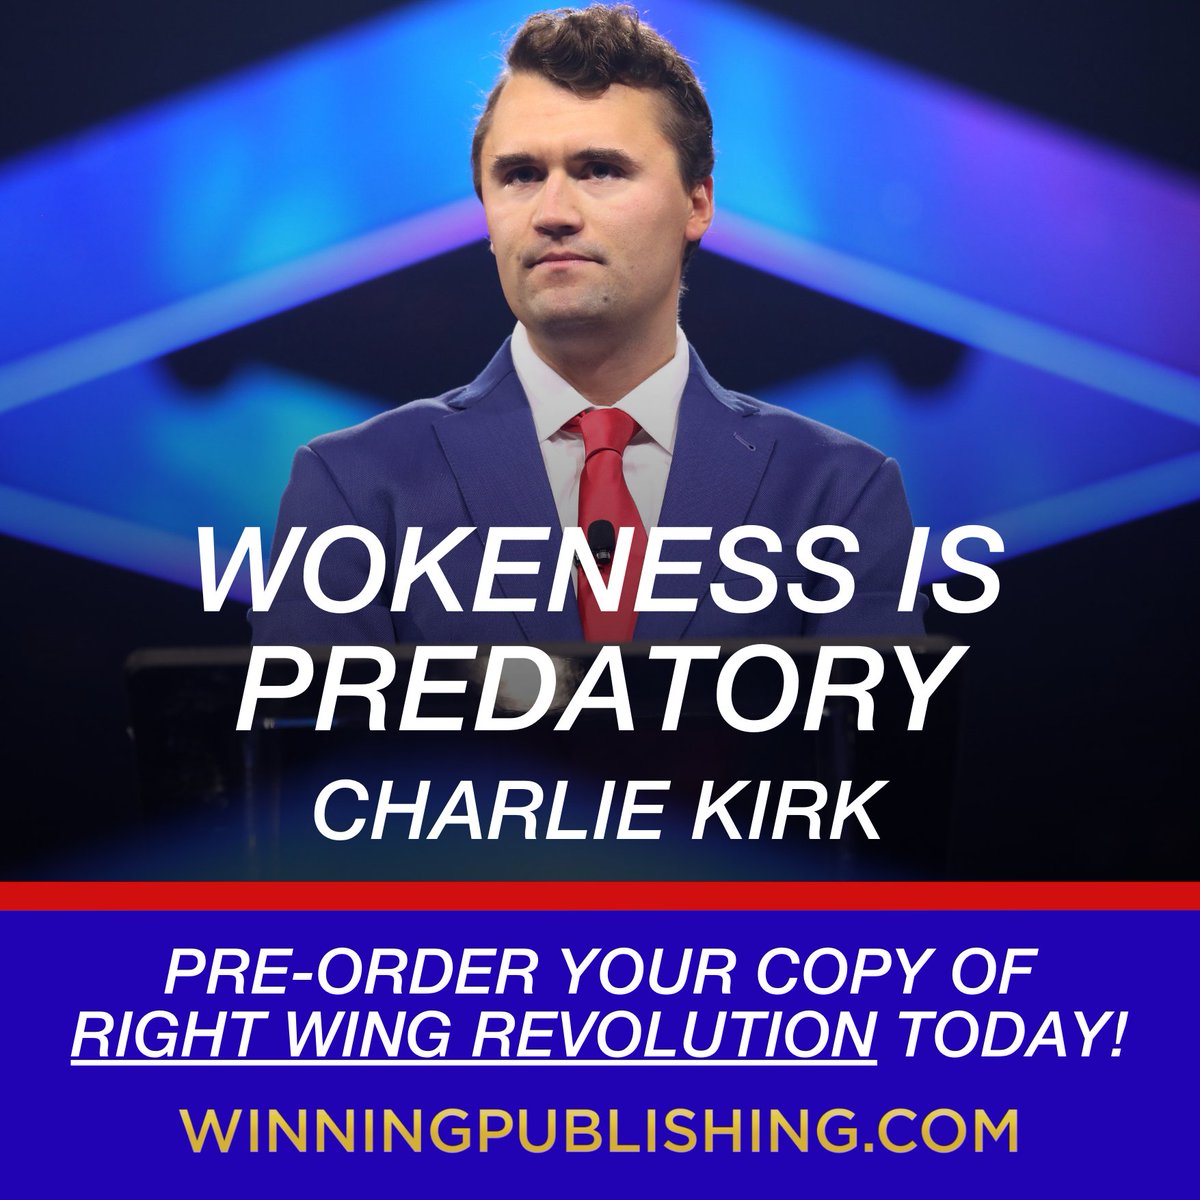 Don't miss your chance to pre-order @charliekirk11's book RIGHT WING REVOLUTION today!